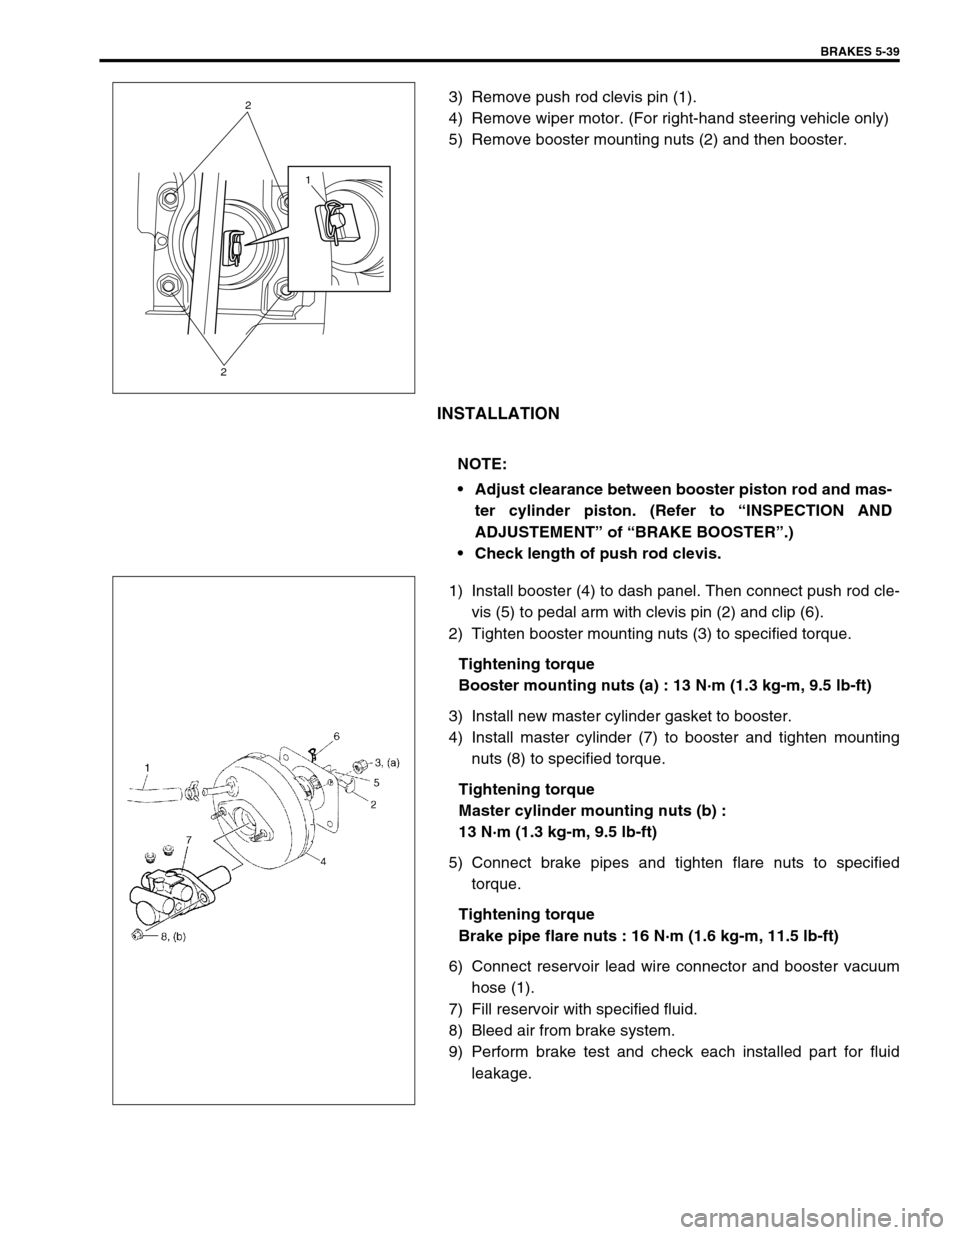 SUZUKI SWIFT 2000 1.G RG413 Service Workshop Manual BRAKES 5-39
3) Remove push rod clevis pin (1).
4) Remove wiper motor. (For right-hand steering vehicle only)
5) Remove booster mounting nuts (2) and then booster.
INSTALLATION
1) Install booster (4) t